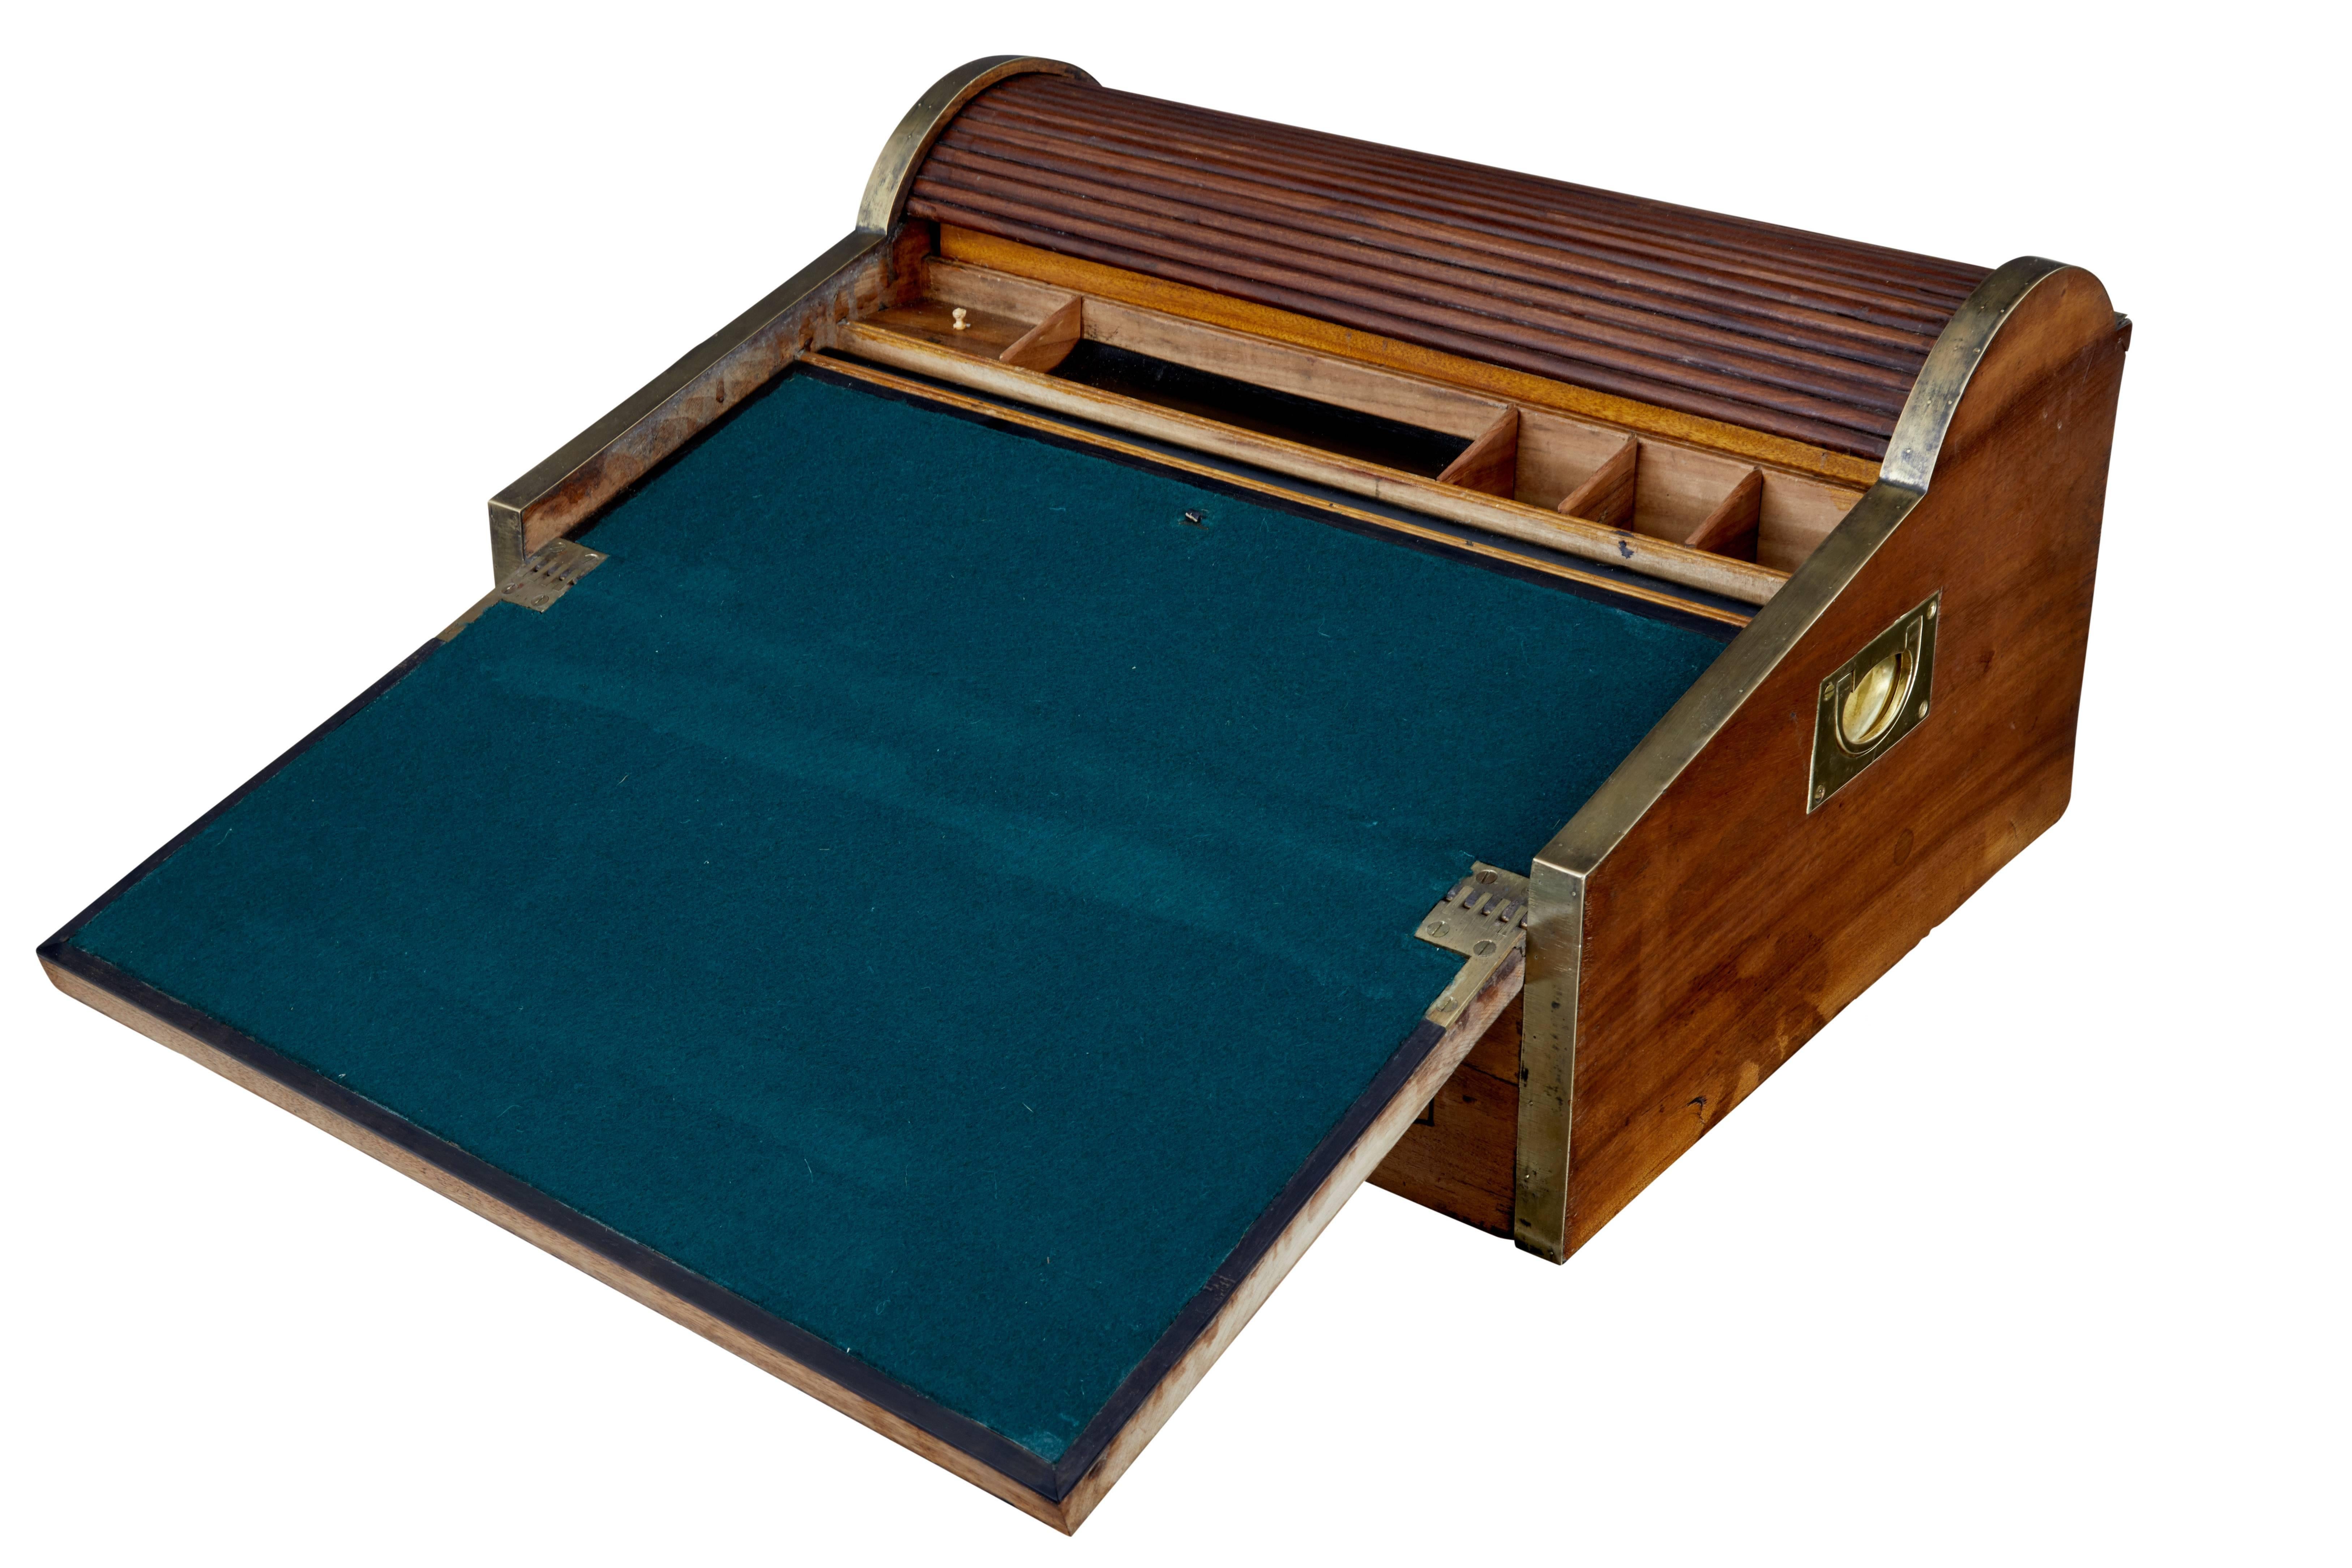 Quality Chinese export camphor wood lap desk, circa 1820. Made for sea Captains and military officers in the field. Brass bound round the outer edge with brass carrying handles. Tambour top opens when you open the front drawer to reveal storage in